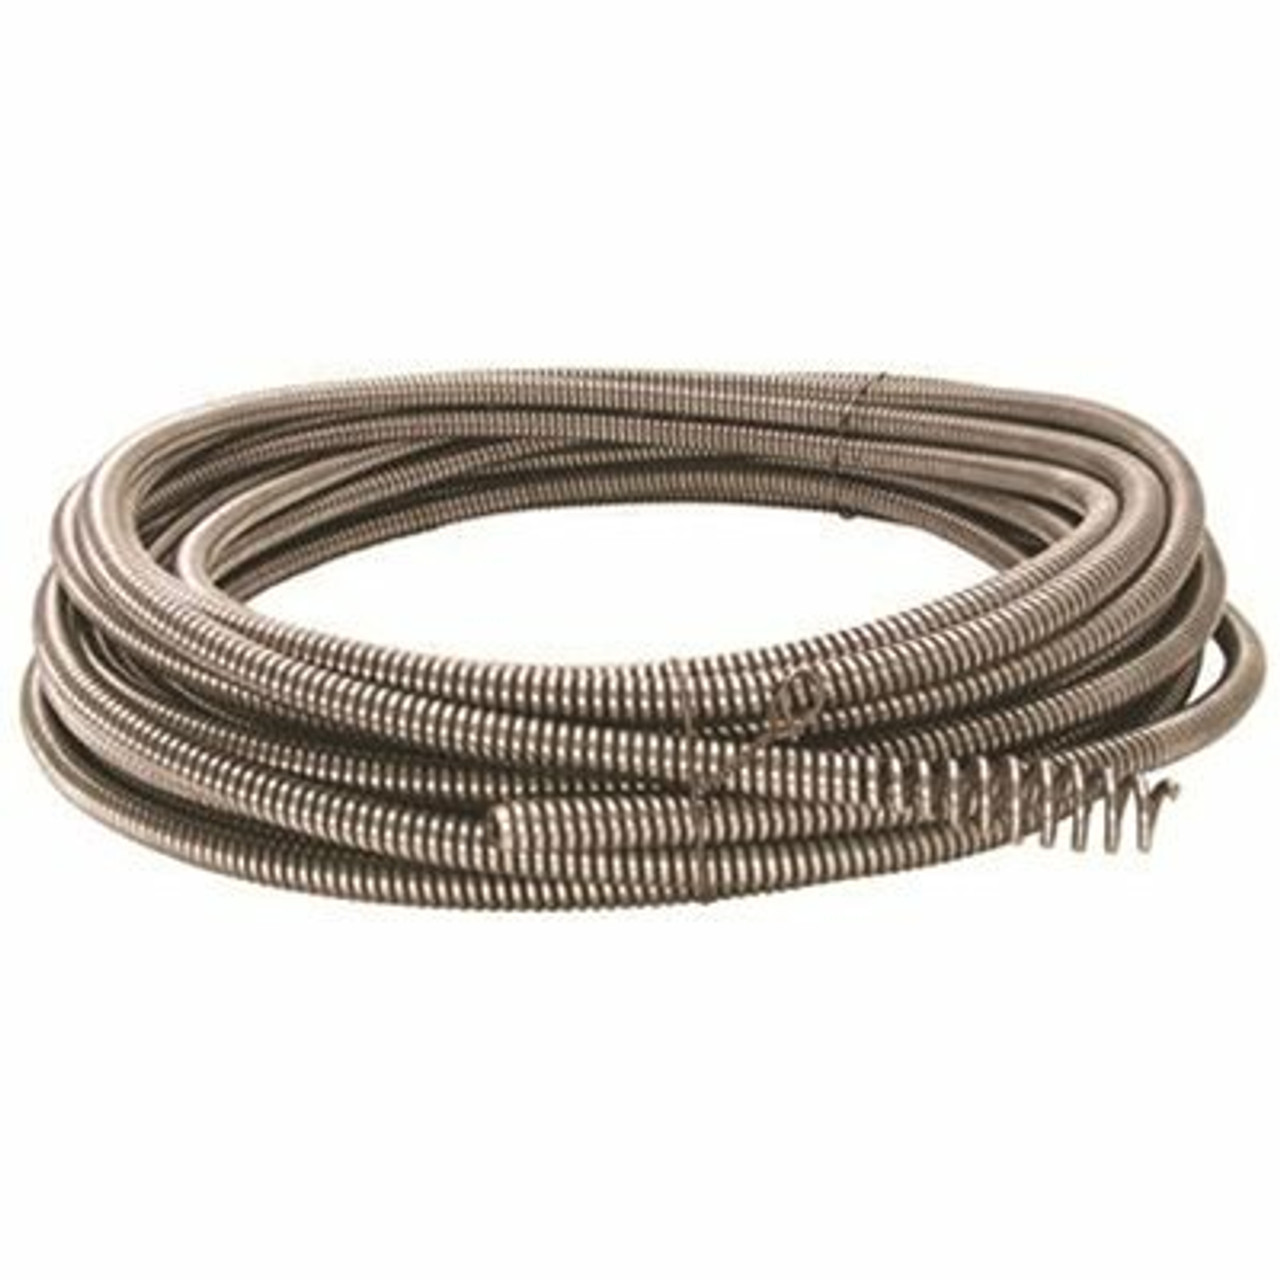 Ridgid C-5 3/8 In. X 35 Ft. Cable With Bulb Auger